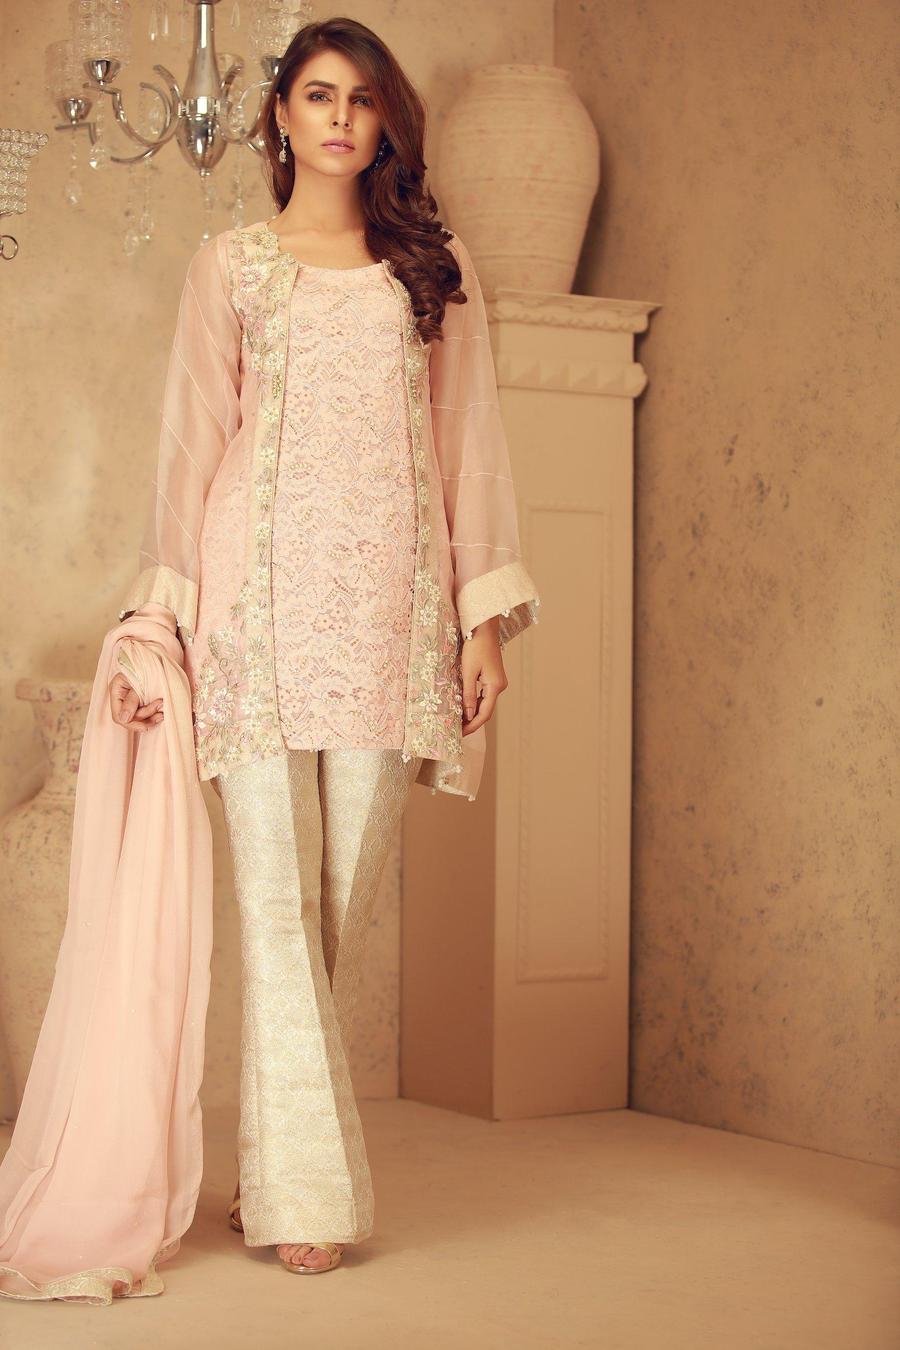 Exclsive Pakistani Party Dresses by Sarosh Salman features this Whisper Pink 3 Piece Luxury Pret Wear